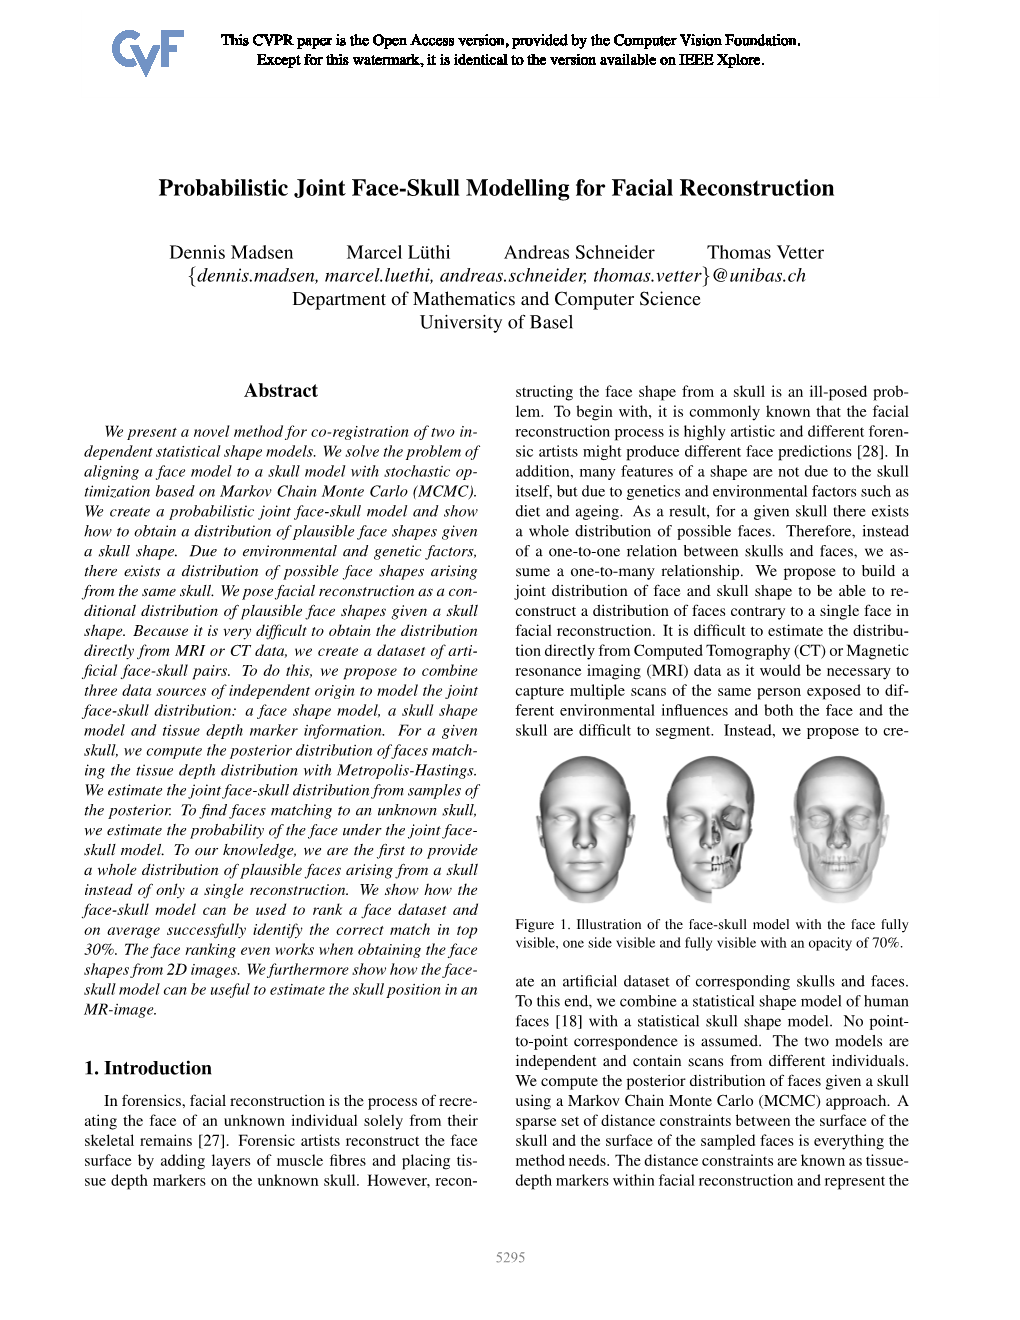 Probabilistic Joint Face-Skull Modelling for Facial Reconstruction